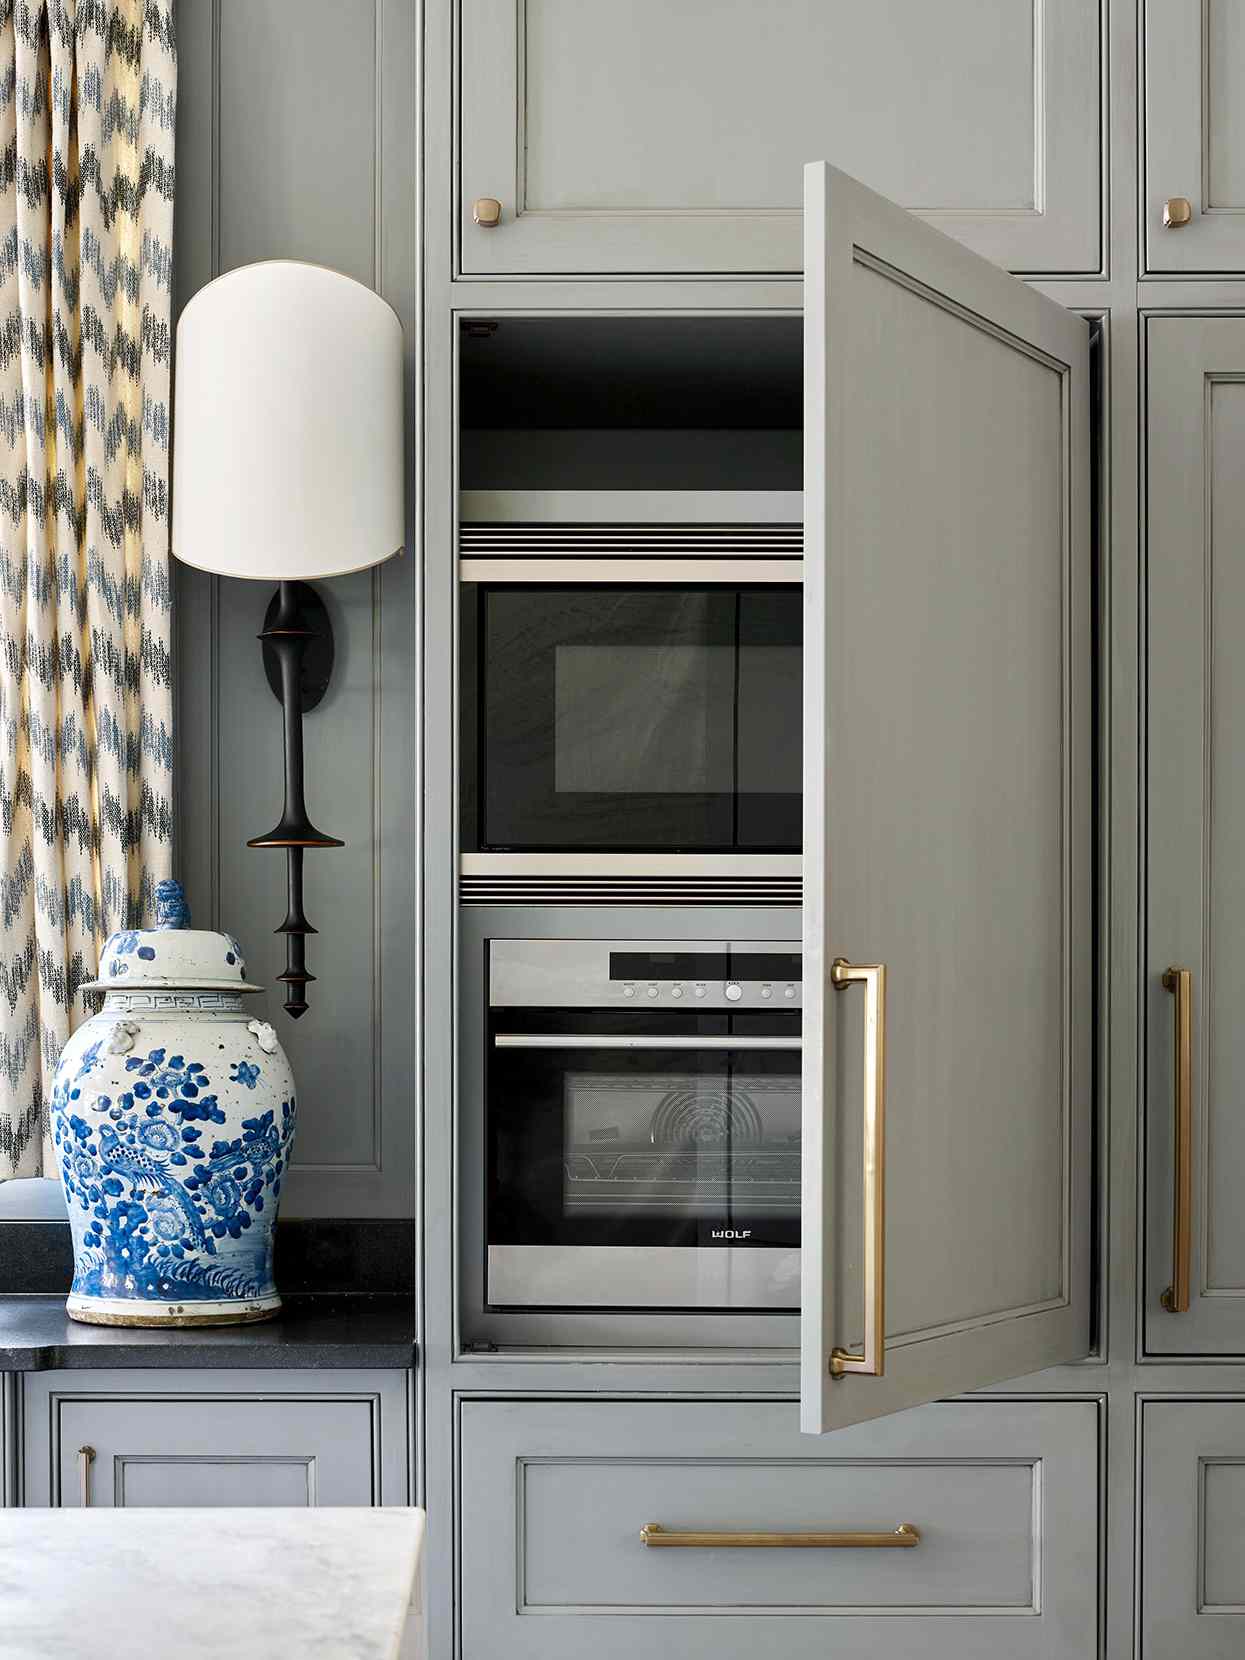 Create a Small Appliance Hideaway